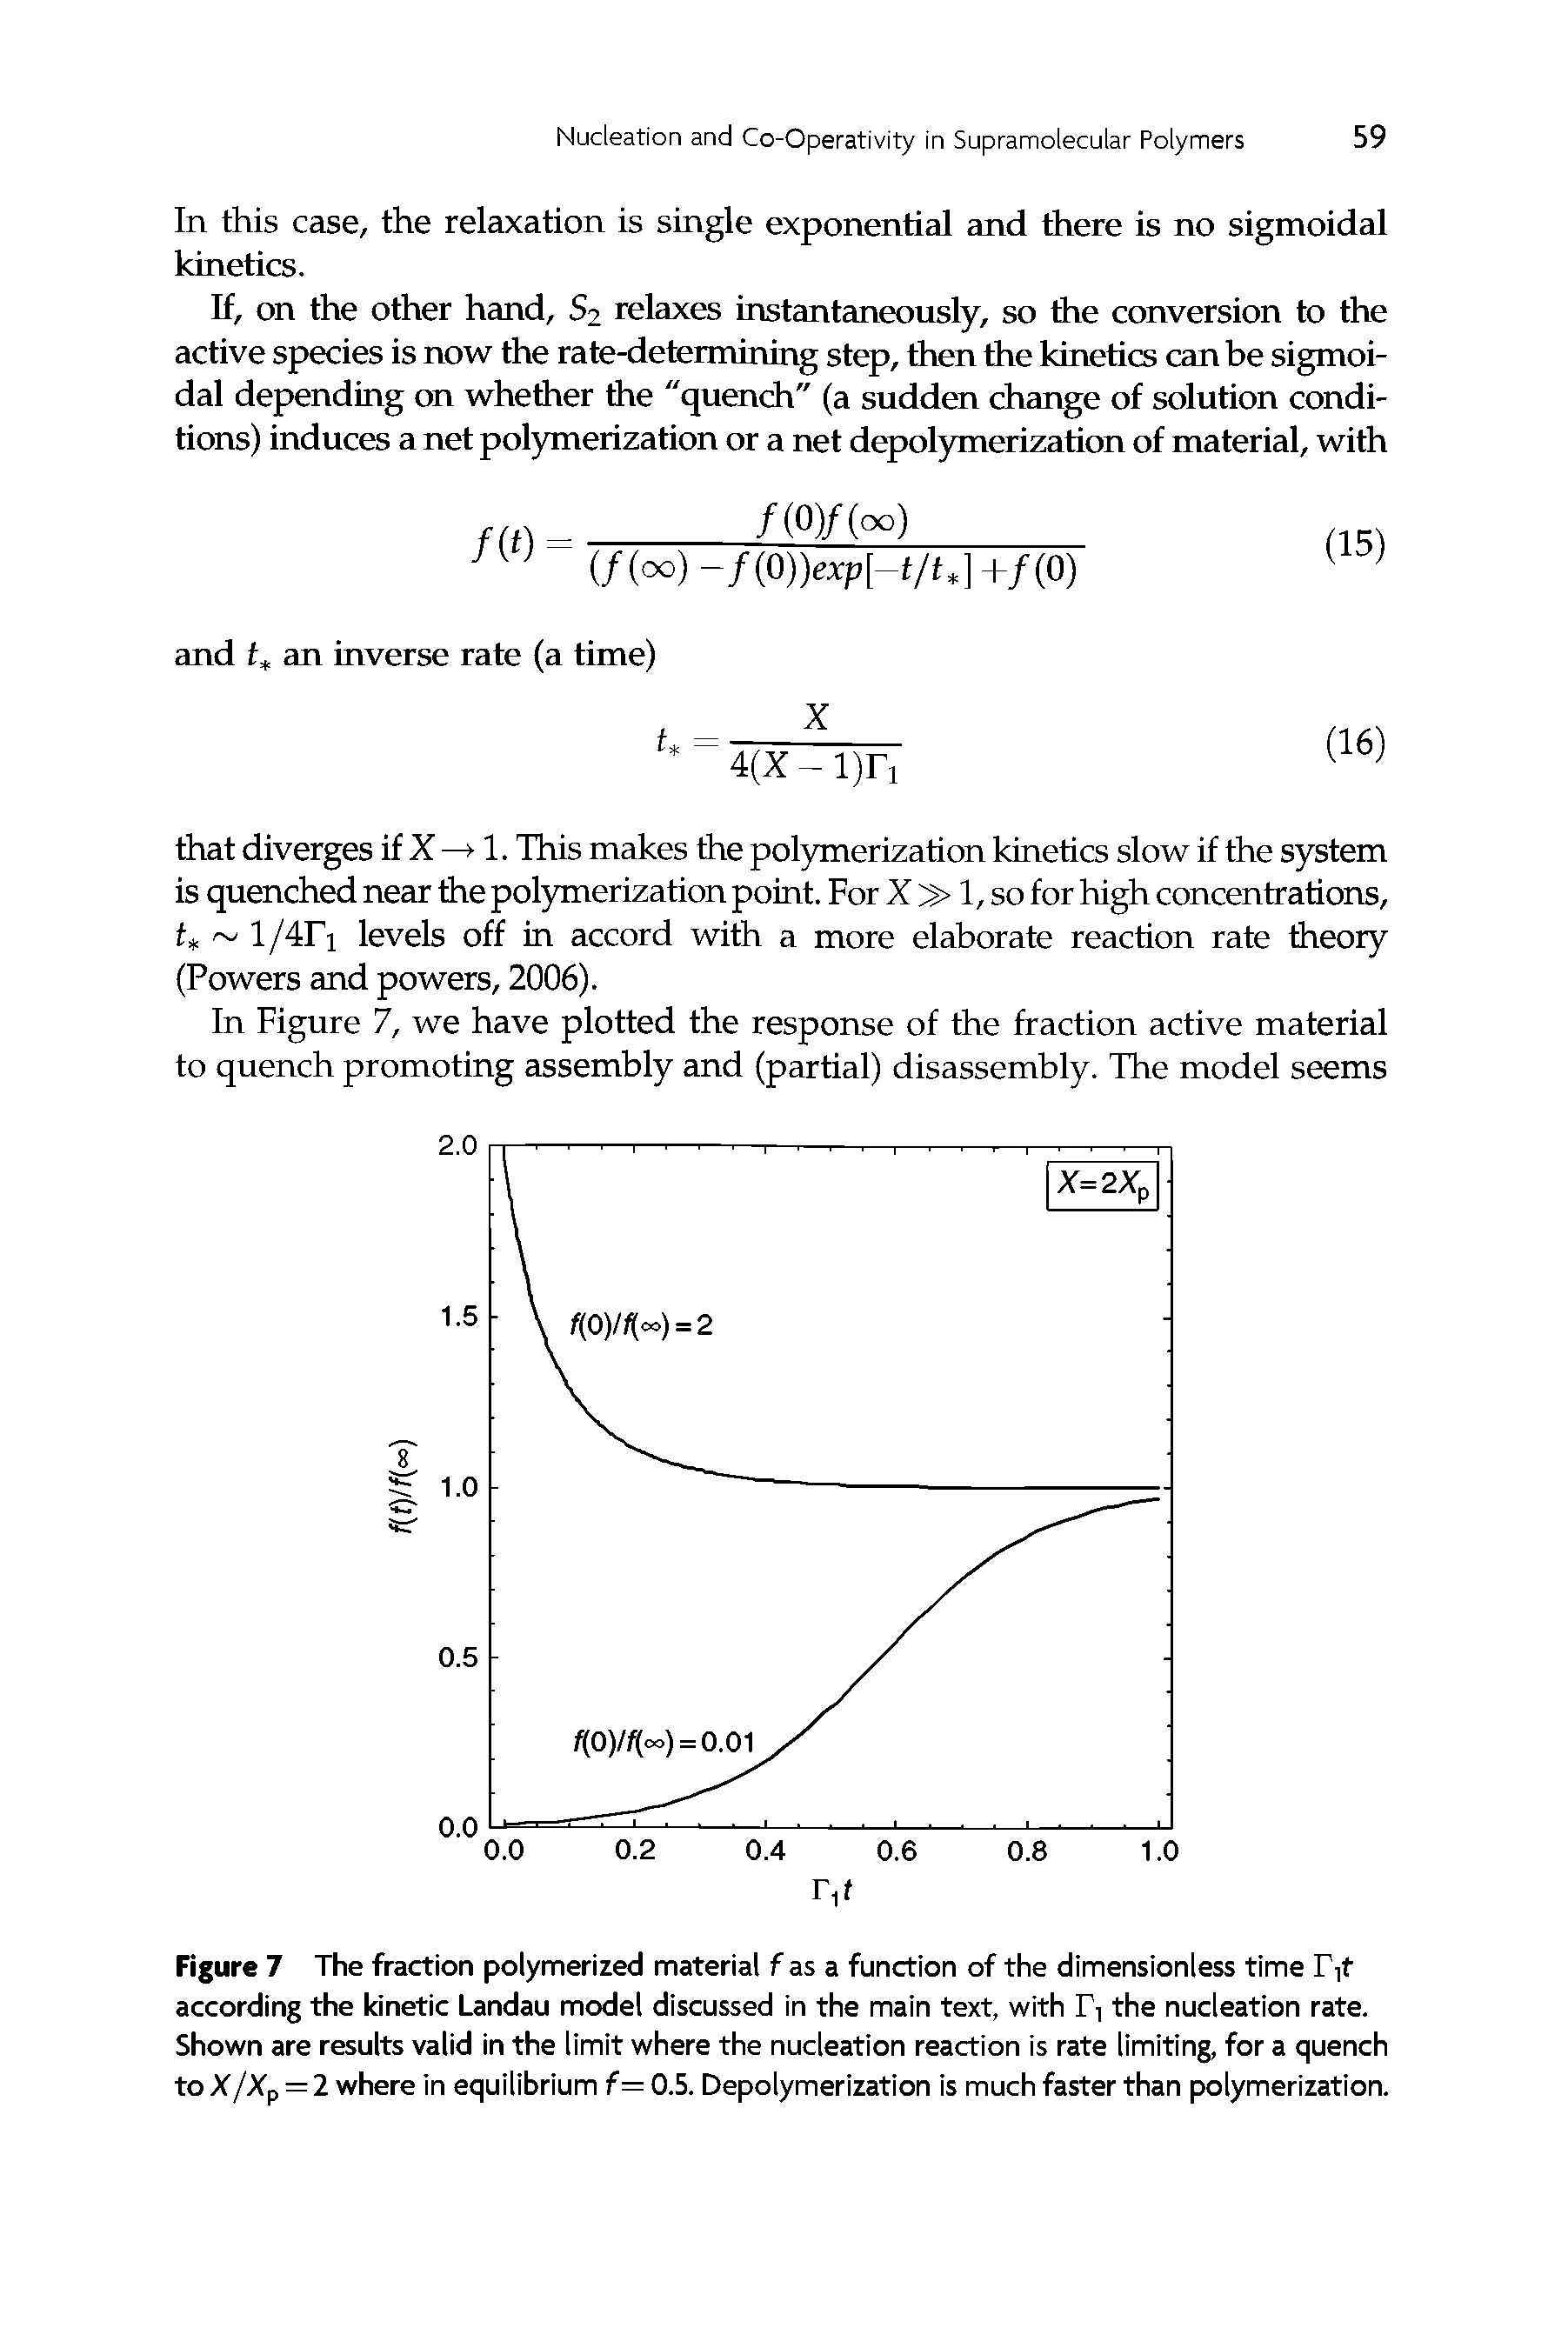 Figure 7 The fraction polymerized material fas a function of the dimensionless time Ty according the kinetic Landau model discussed in the main text, with h the nucleation rate. Shown are results valid in the limit where the nucleation reaction is rate limiting, for a quench to X/Xp = 2 where in equilibrium f— 0.5. Depolymerization is much faster than polymerization.